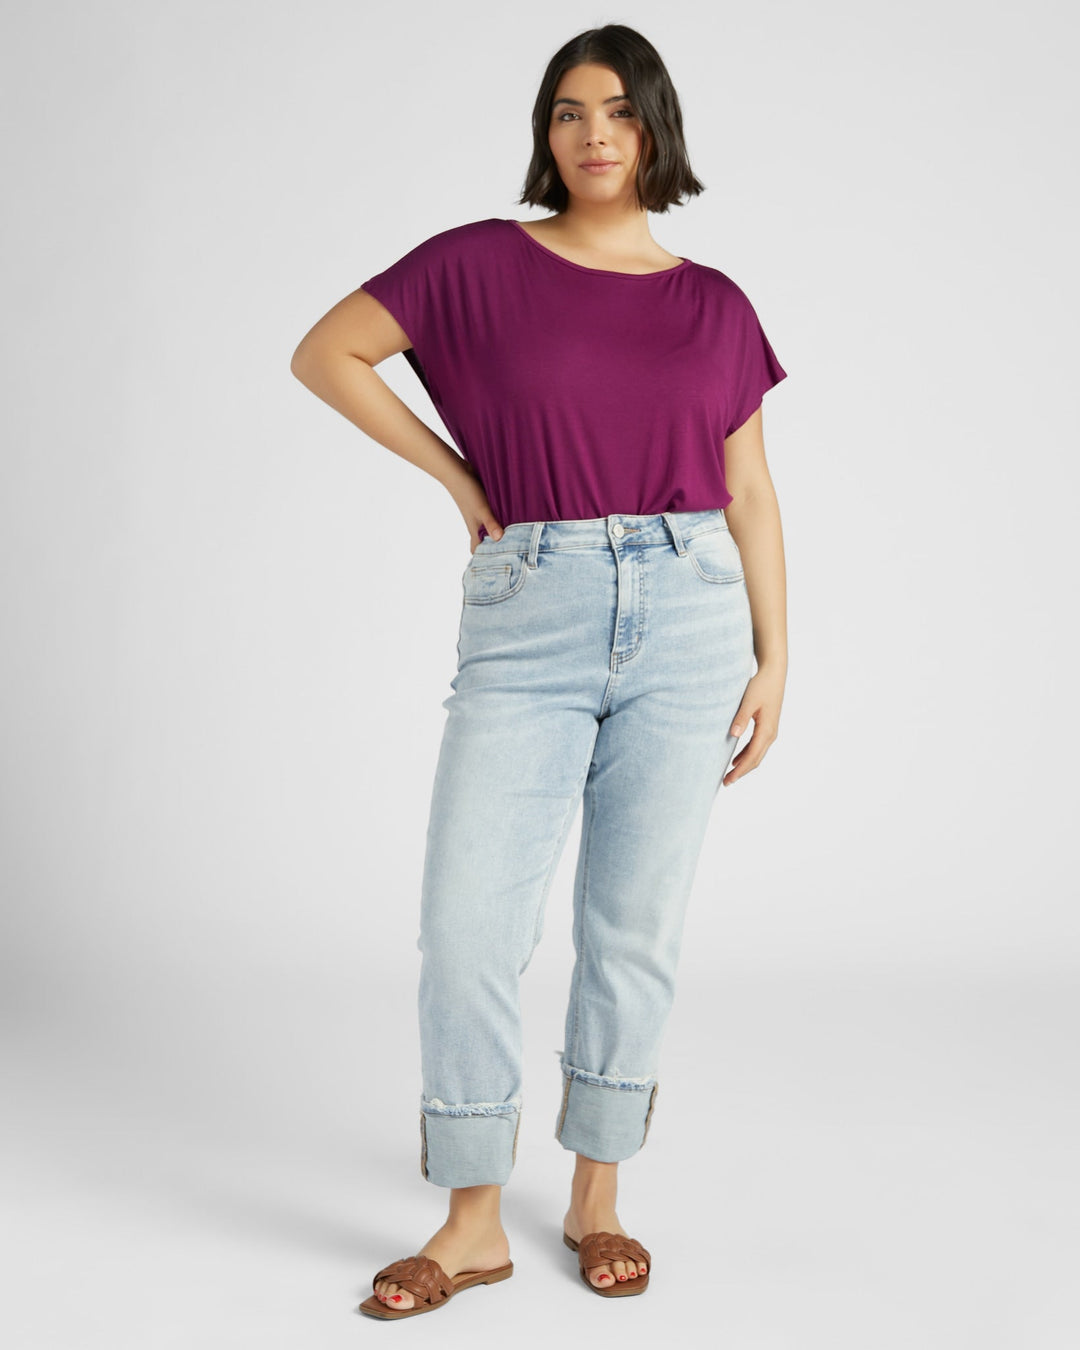 Plum $|& 78&SUNNY Brentwood Boat Neck Top - SOF Full Front